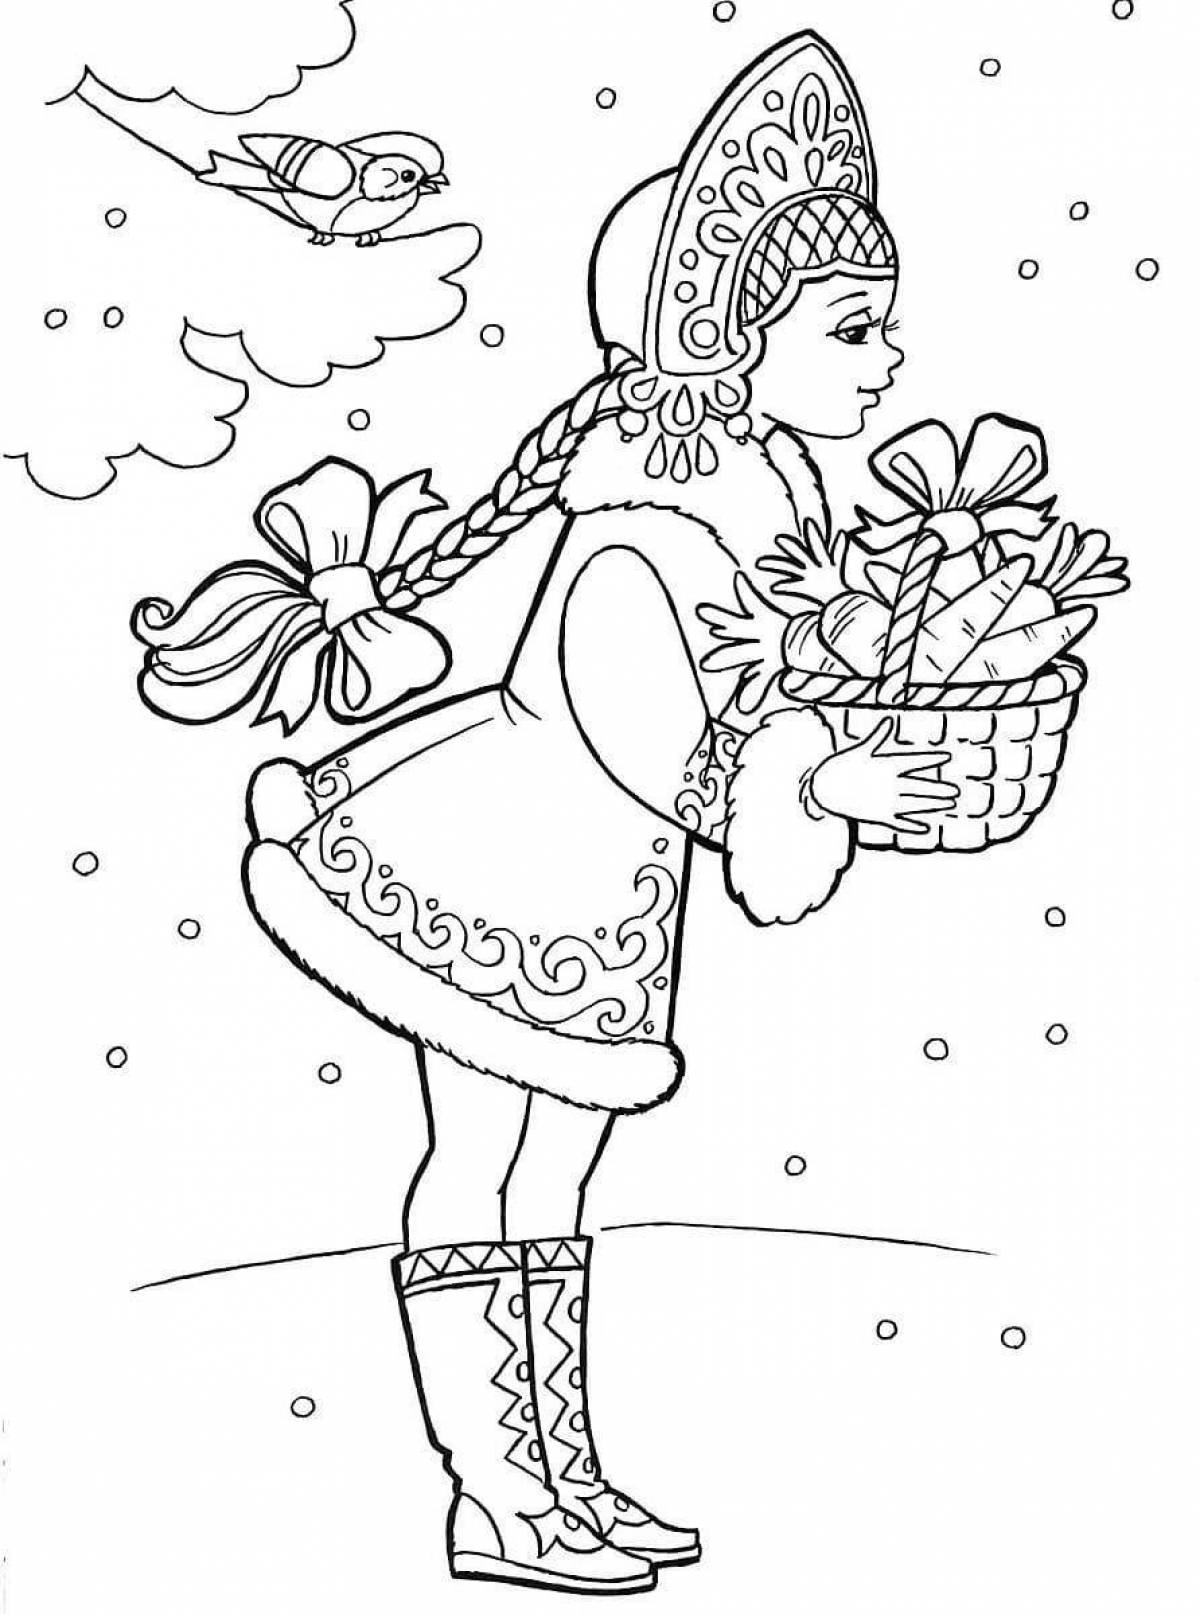 Cute snow maiden coloring by numbers